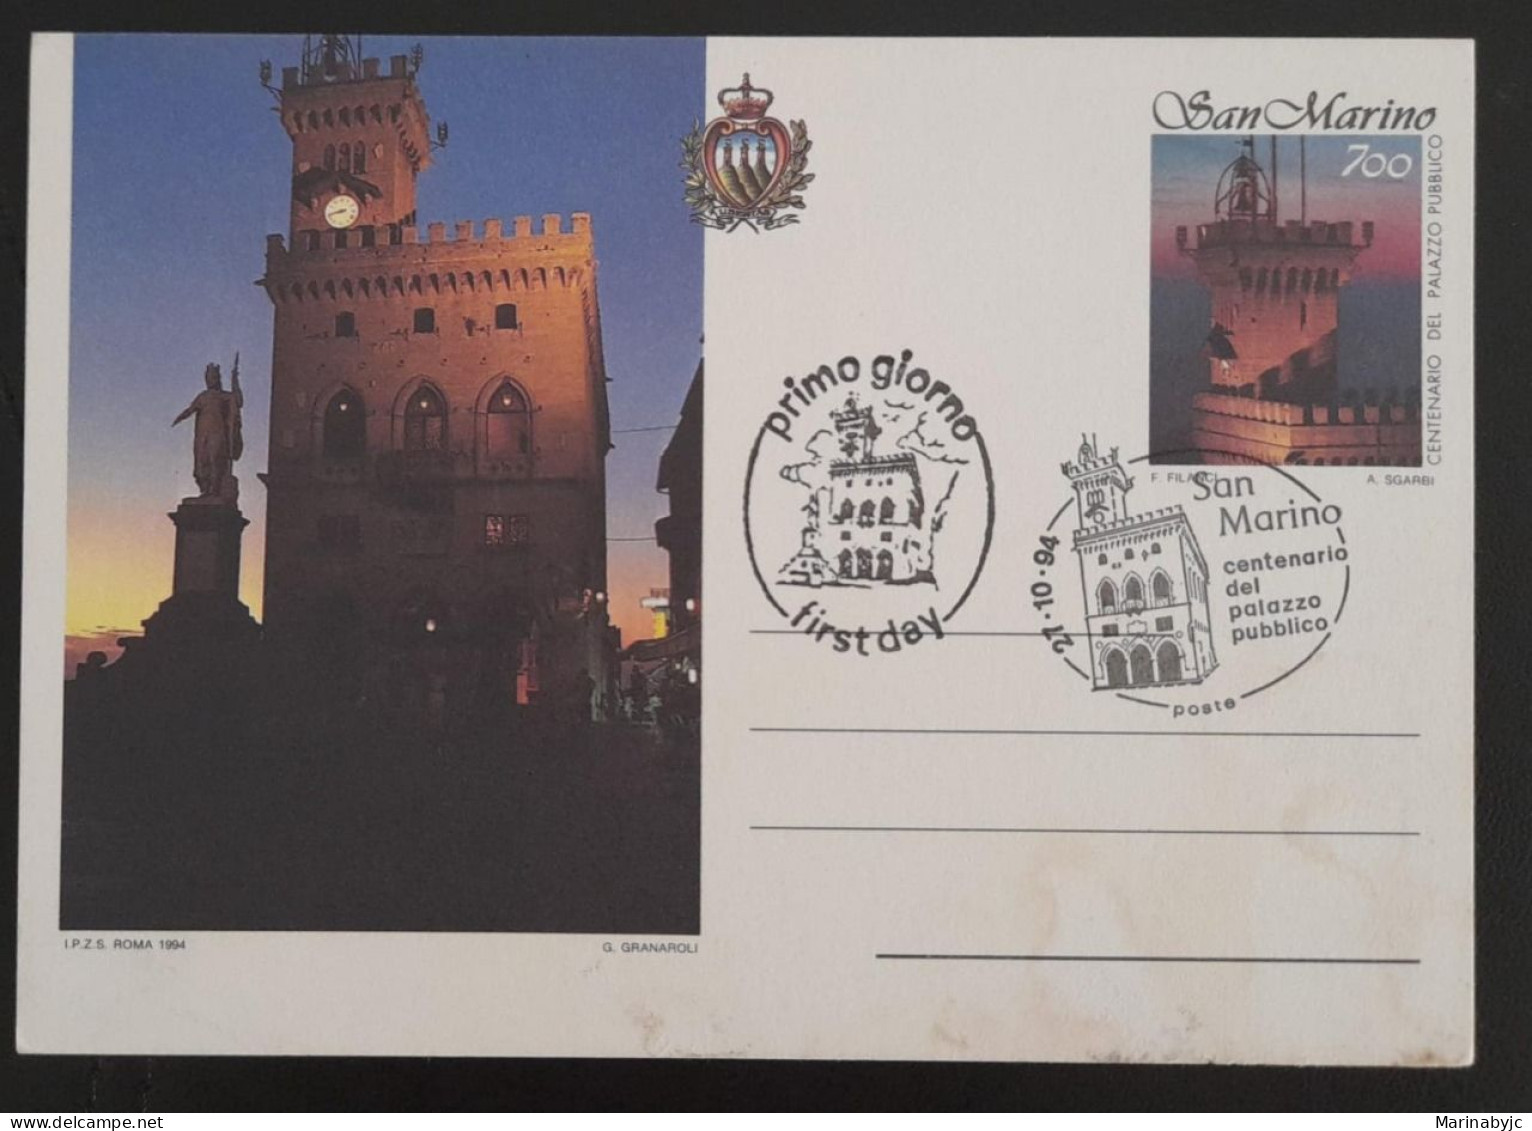 SD)1995, SAN MARINO, POSTAL COMPLETE WITH CANCELLATION OF THE FIRST DAY, CENTENARY OF THE PUBLIC PALACE OF THE REPUBLIC - Lots & Serien